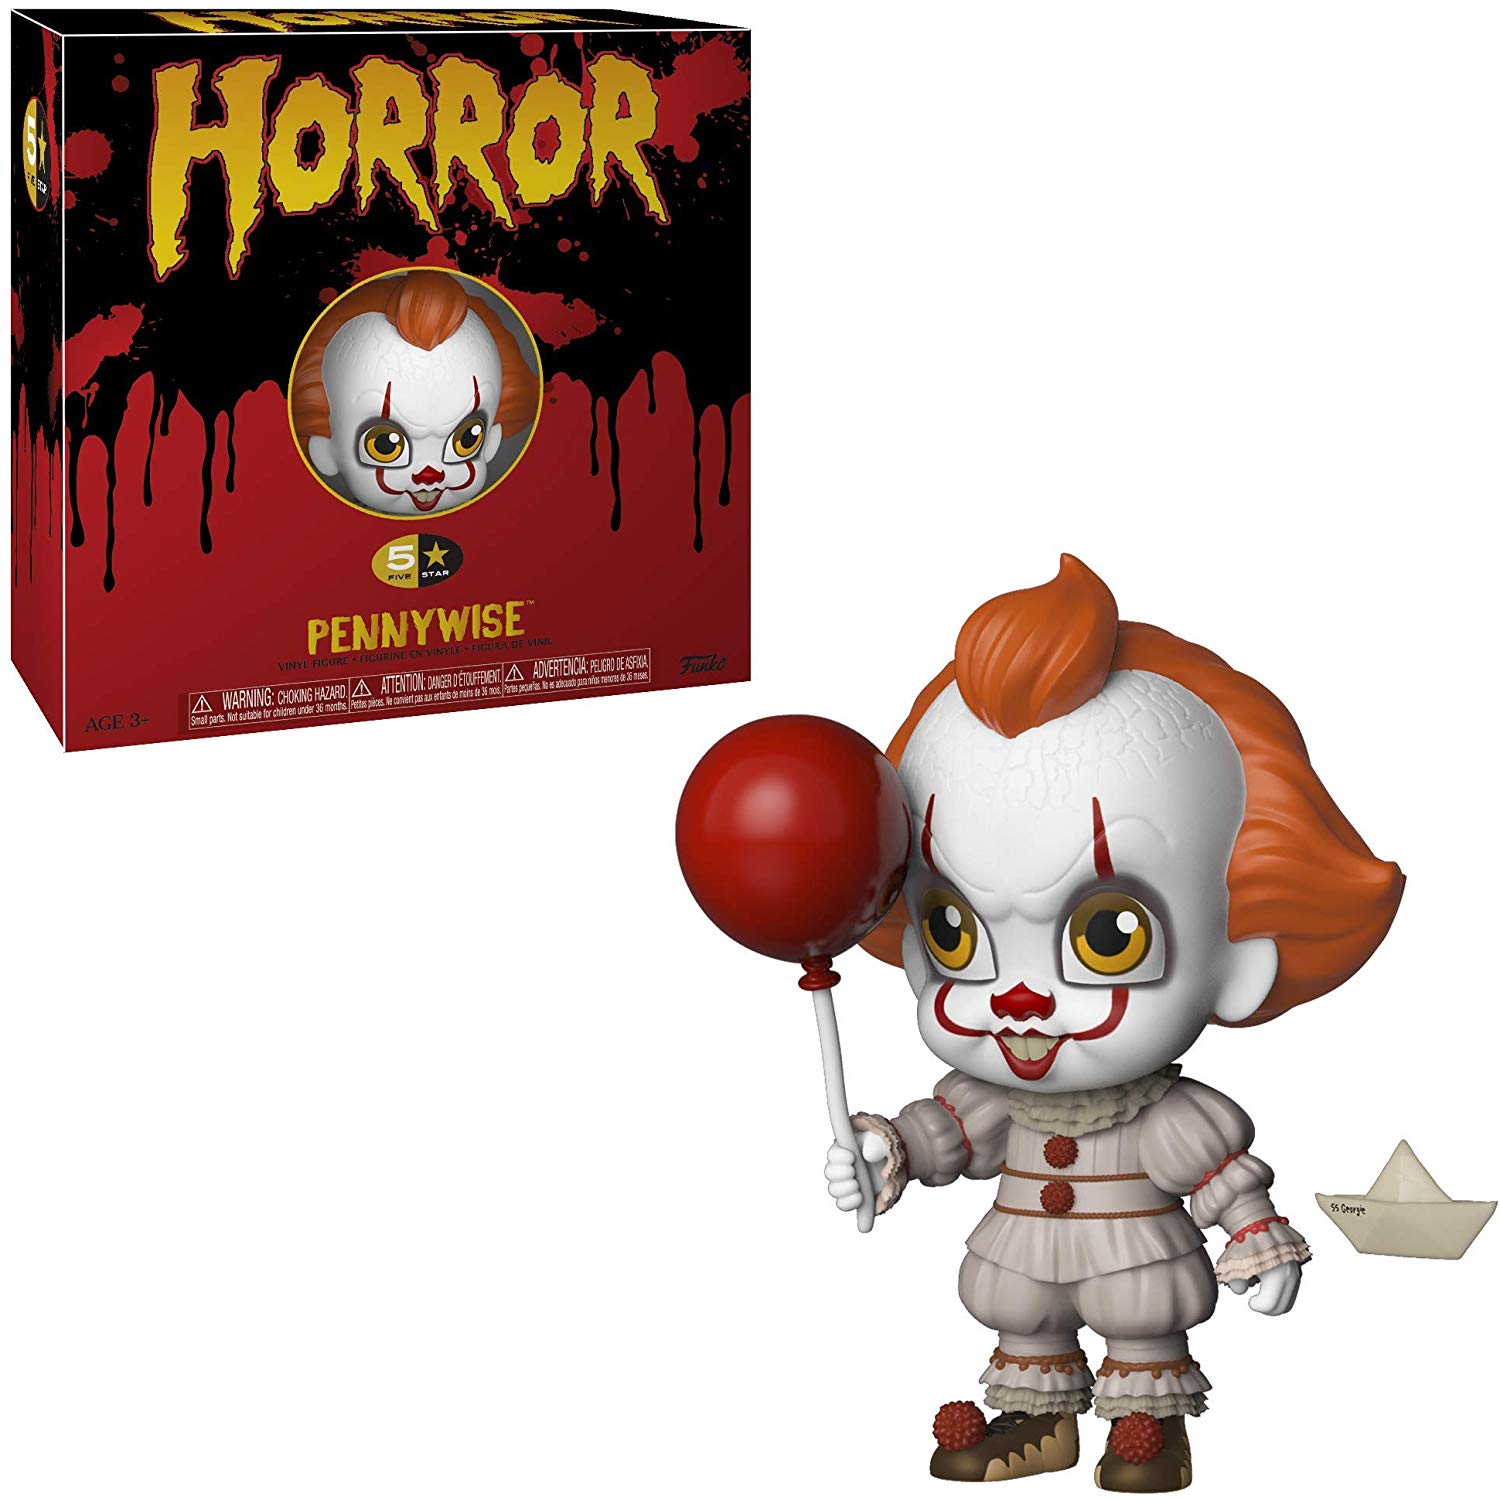 Pennywise IT Figurine - oddgifts.com